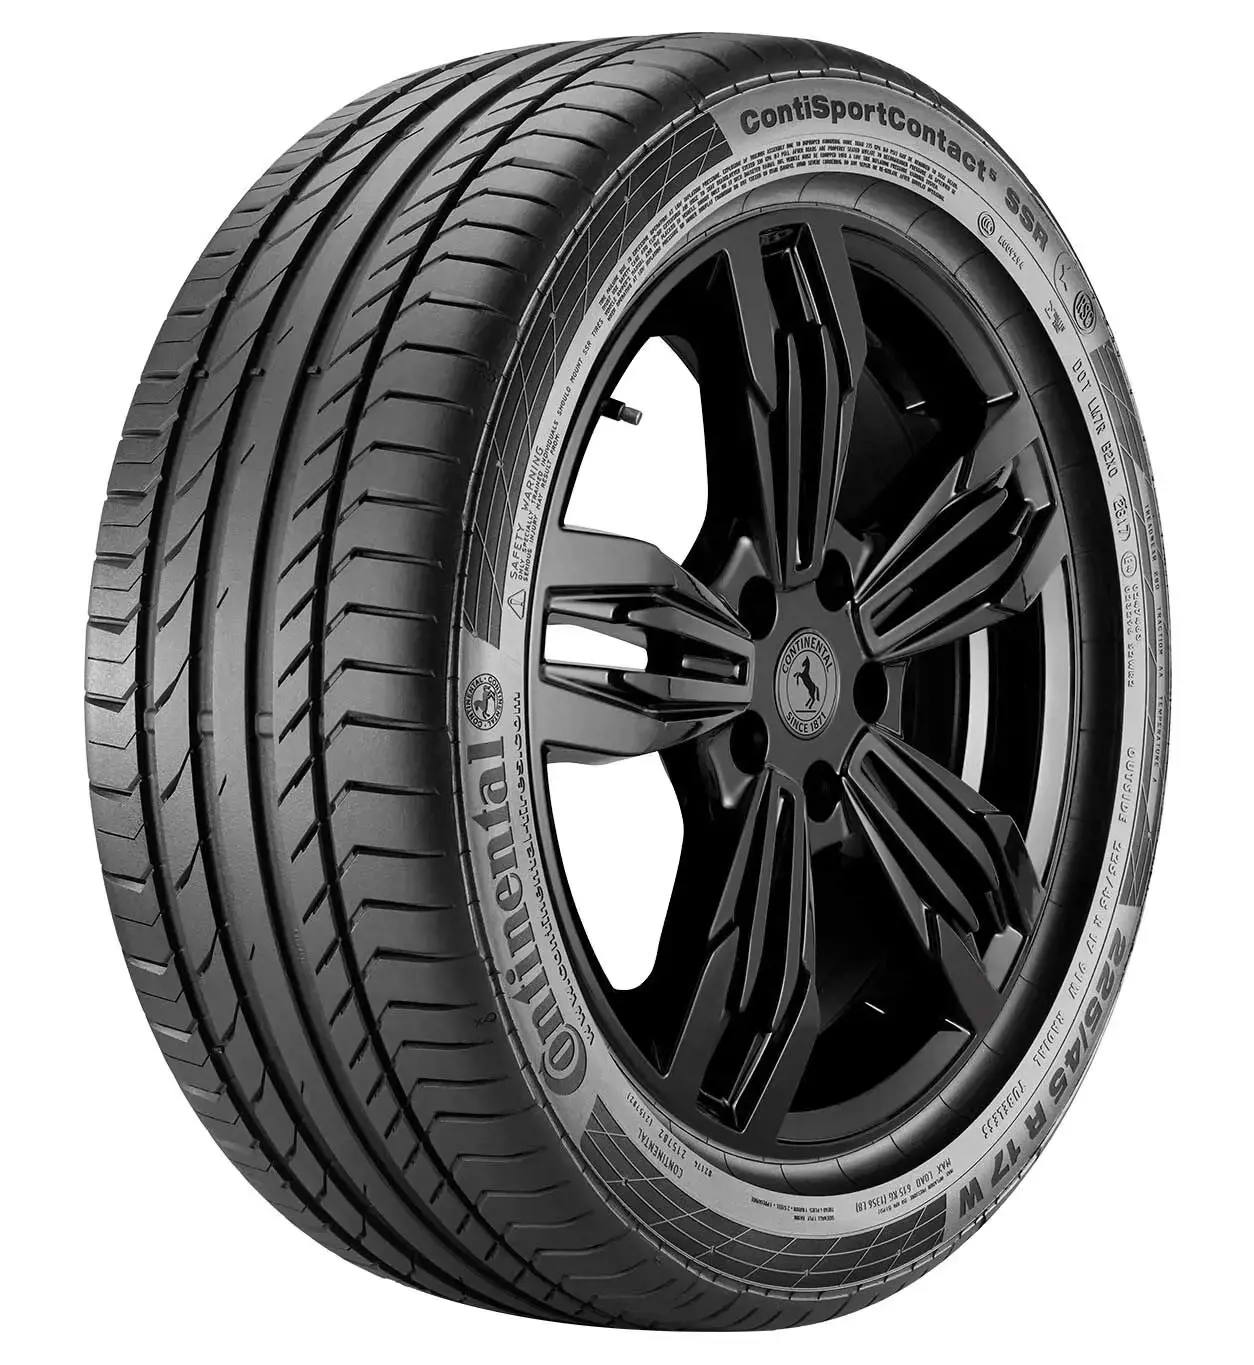 SportContact 5 195/45 Continental 81W R17